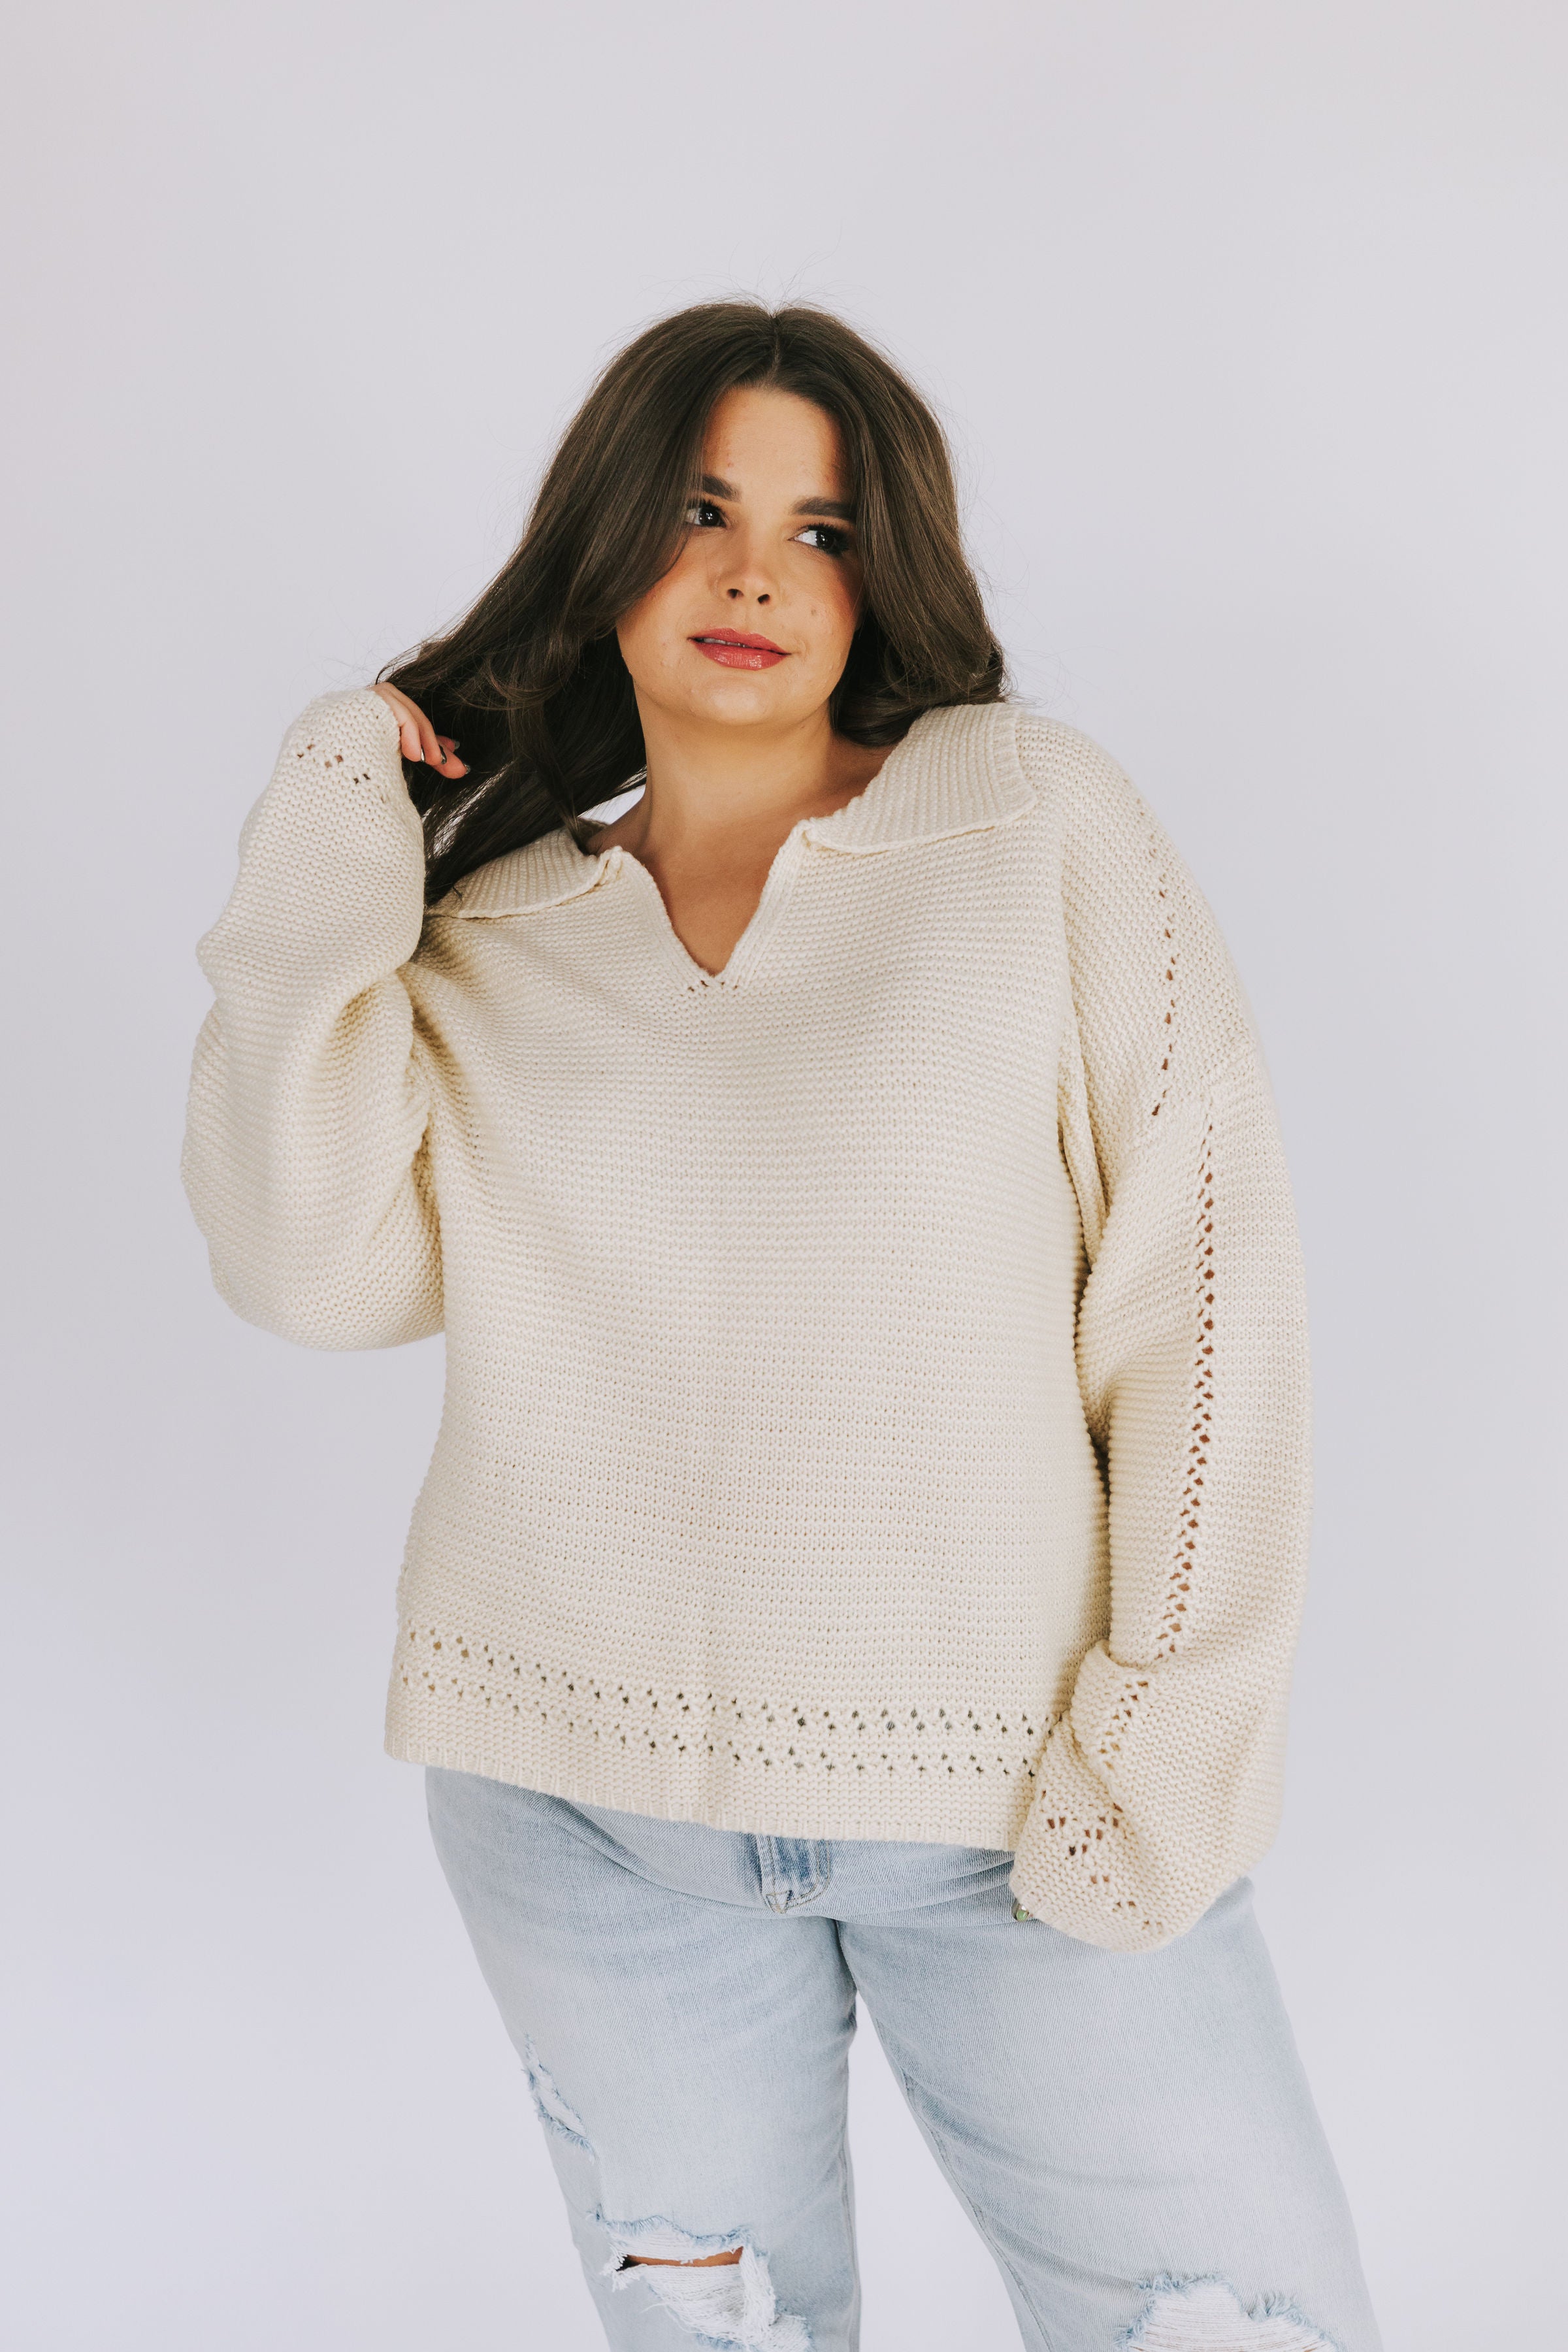 PLUS SIZE - By My Side Sweater